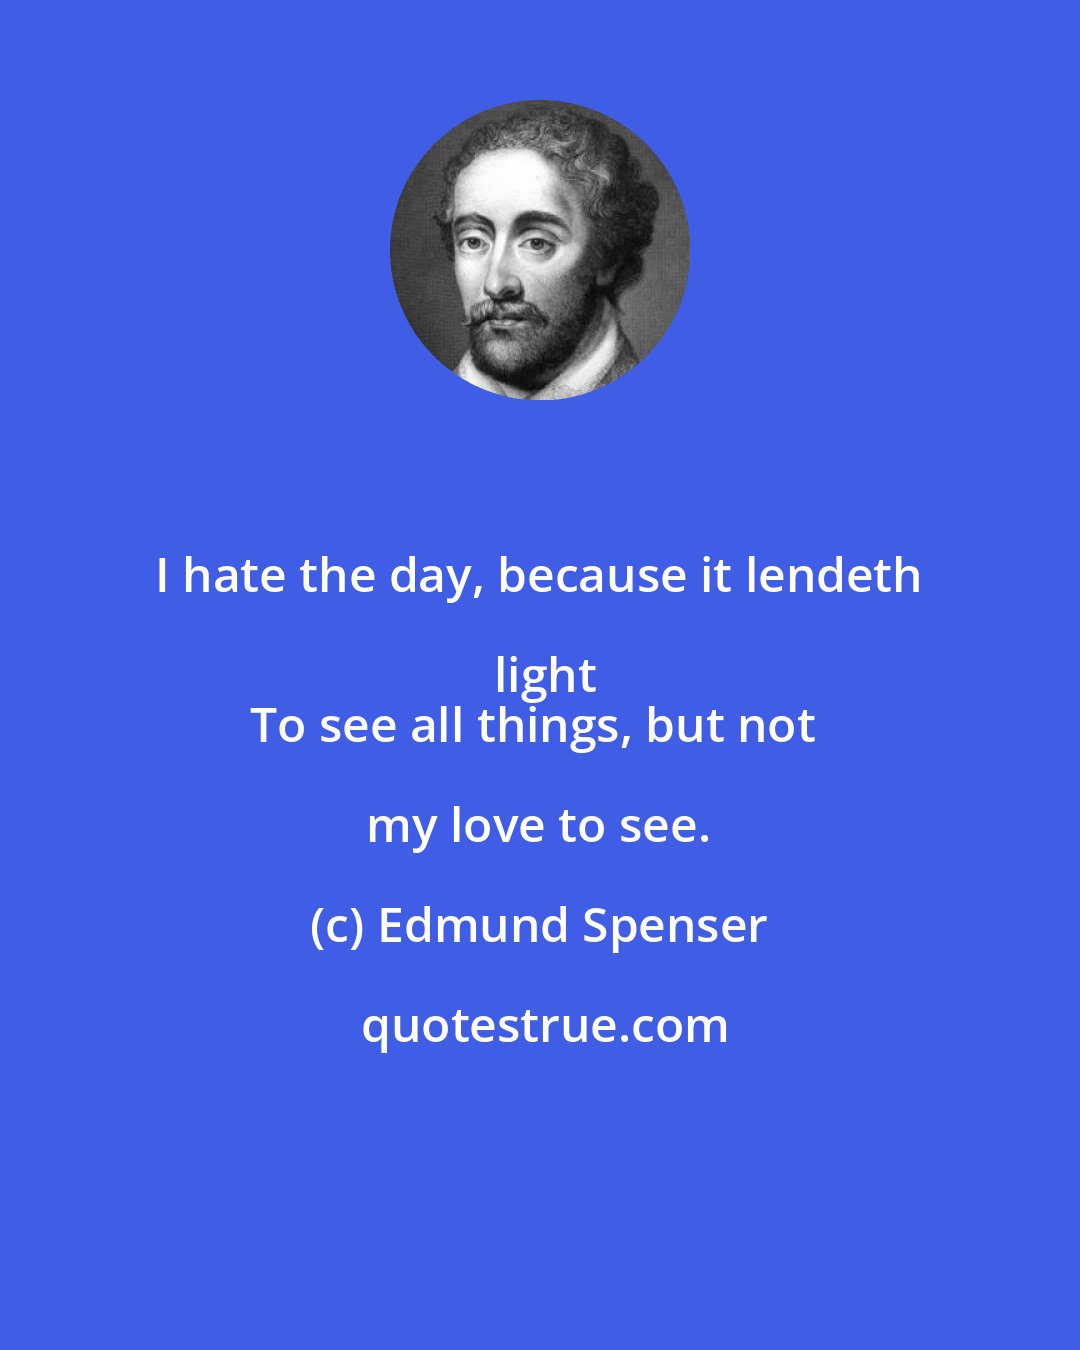 Edmund Spenser: I hate the day, because it lendeth light
To see all things, but not my love to see.